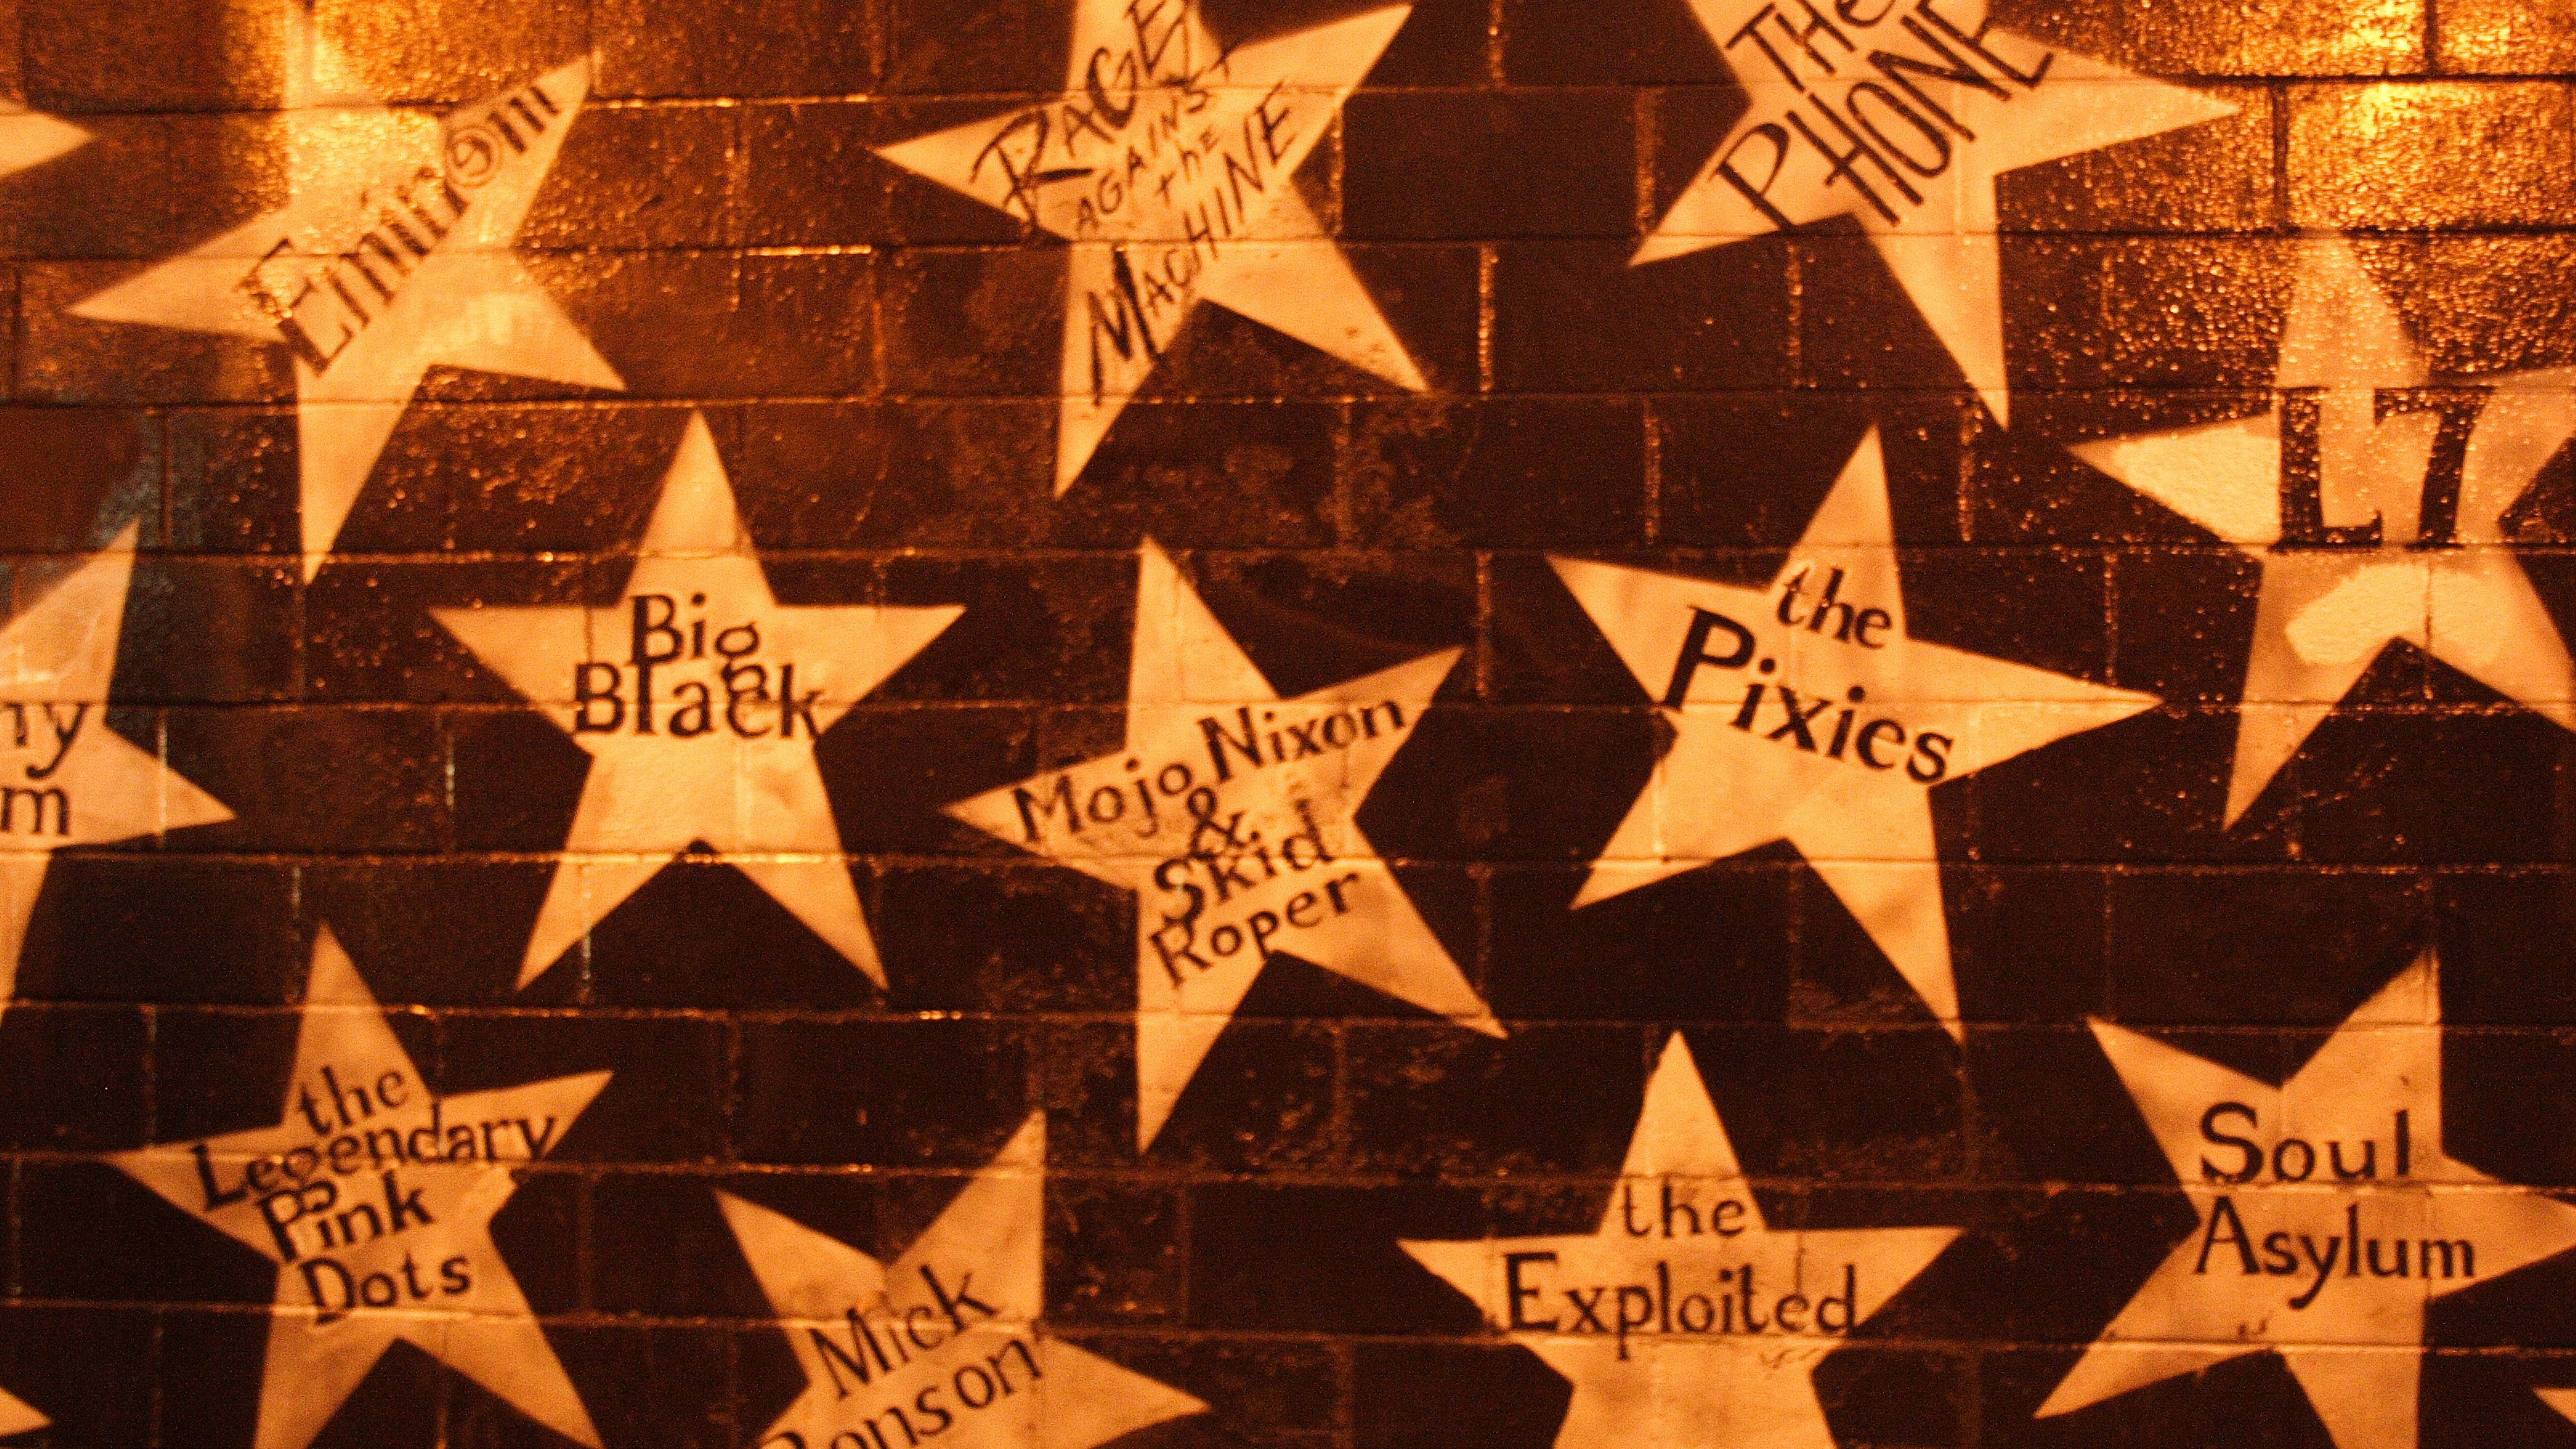 Exterior of a building painted with large stars containing various musical artist's names.